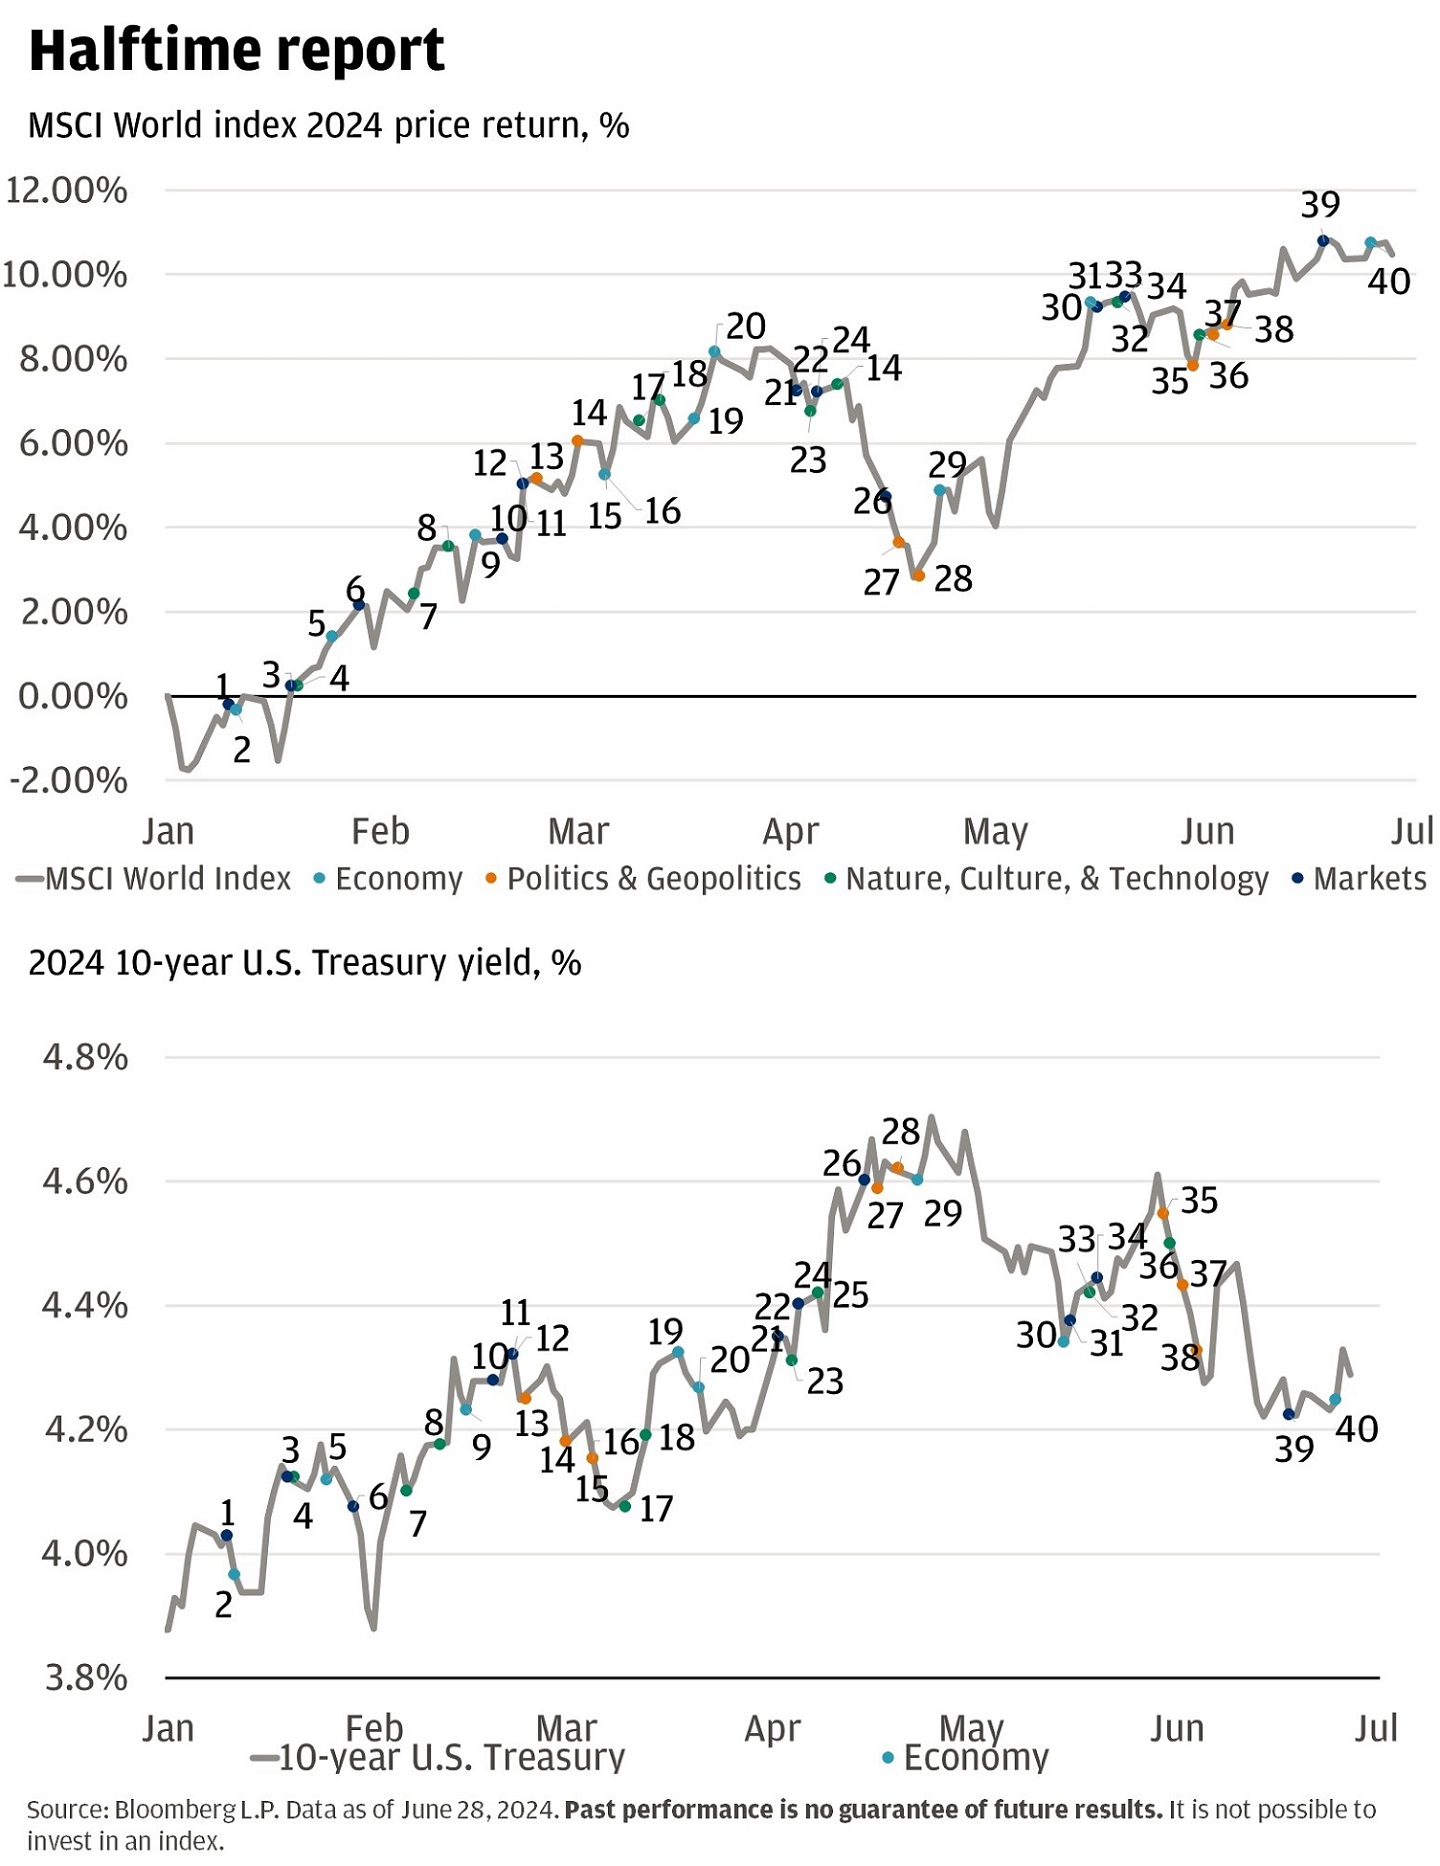 These two line graphs show the MSCI world index in 2024 and the 10-year U.S. Treasury in 2024.